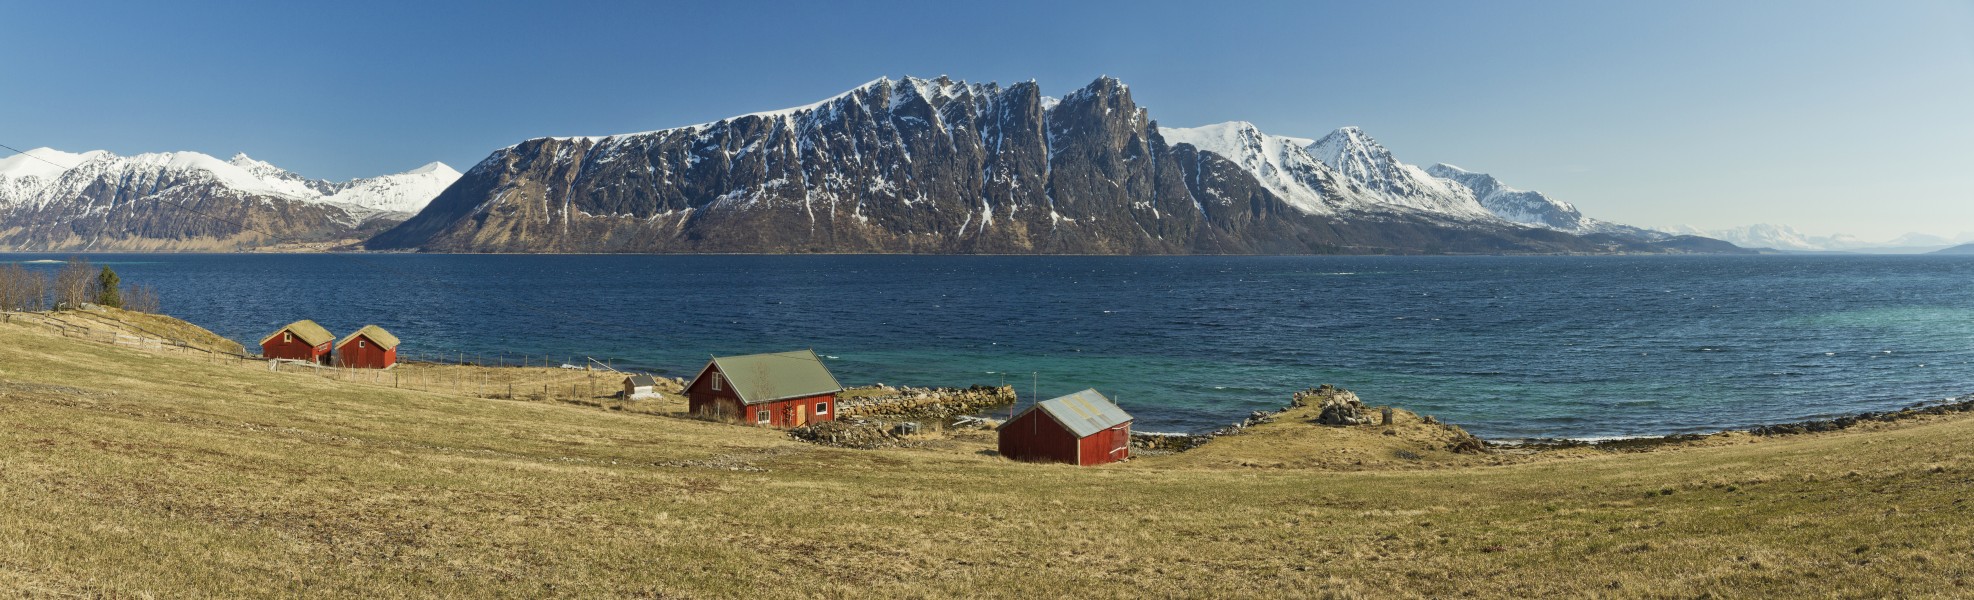 A view to Toppsundet from Ytter-Aun, Hinnøya, Troms, Norway, 2015 April